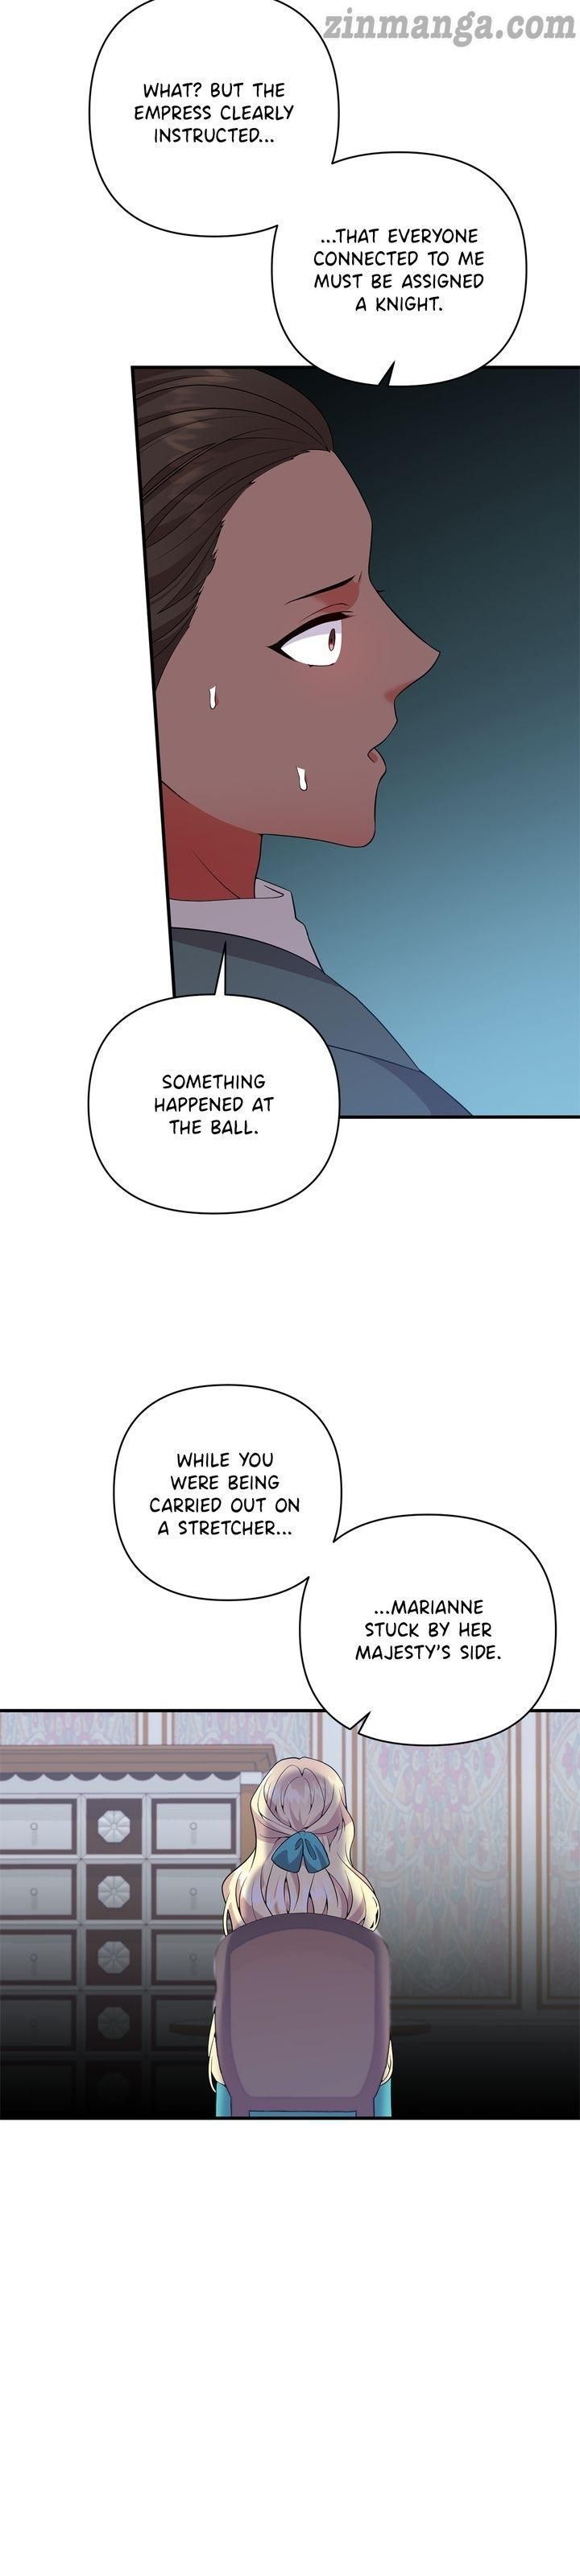 Give A Heart To The Emperor Chapter 55 page 6